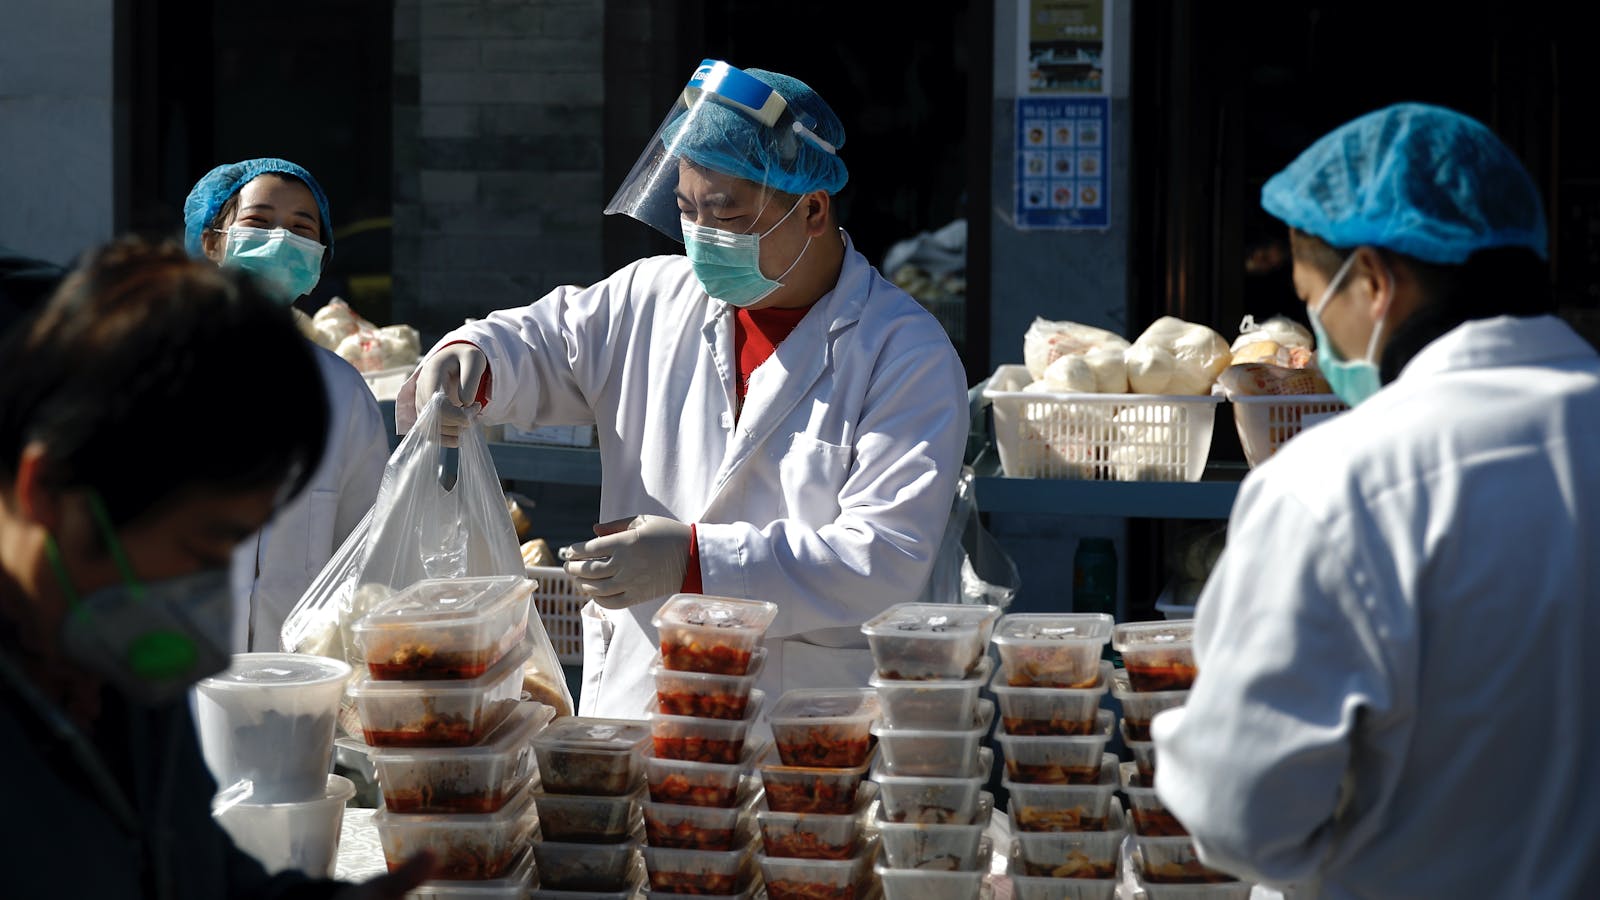 Workers at a Beijing restaurant packing takeout orders on Sunday. Photo by AP